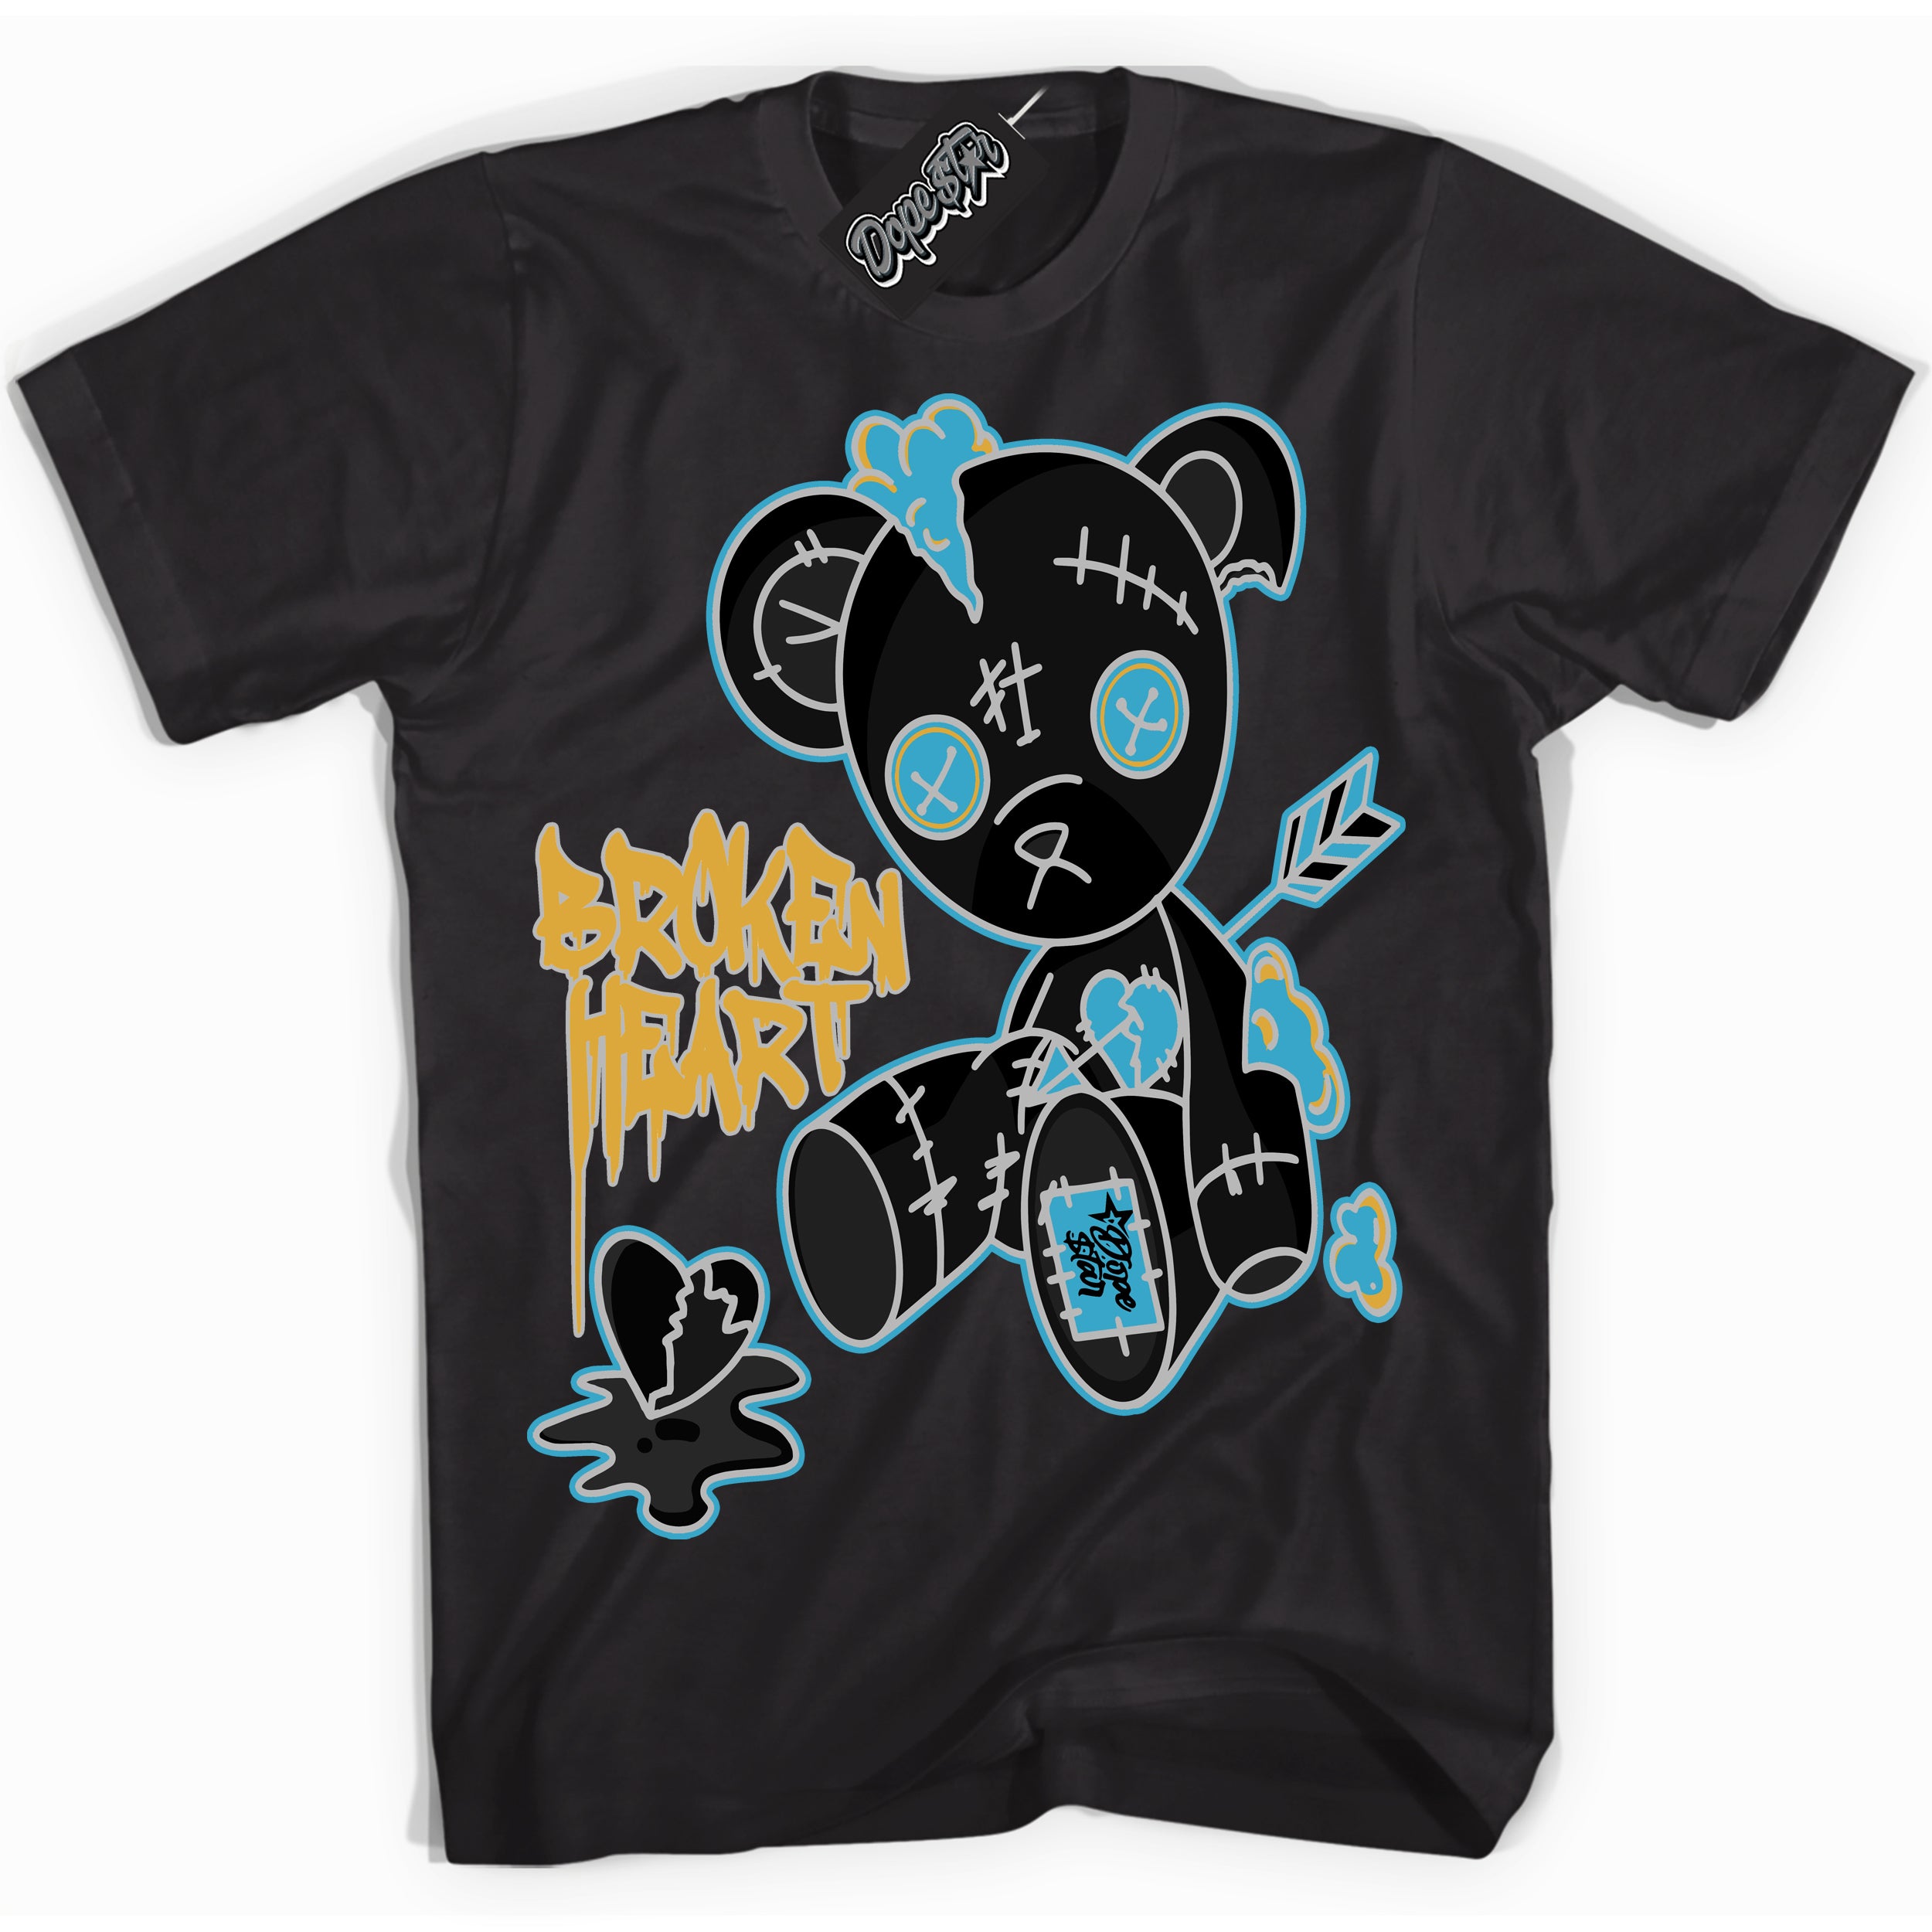 Cool Black Shirt with “ Broken Heart Bear” design that perfectly matches Aqua 5s Sneakers.